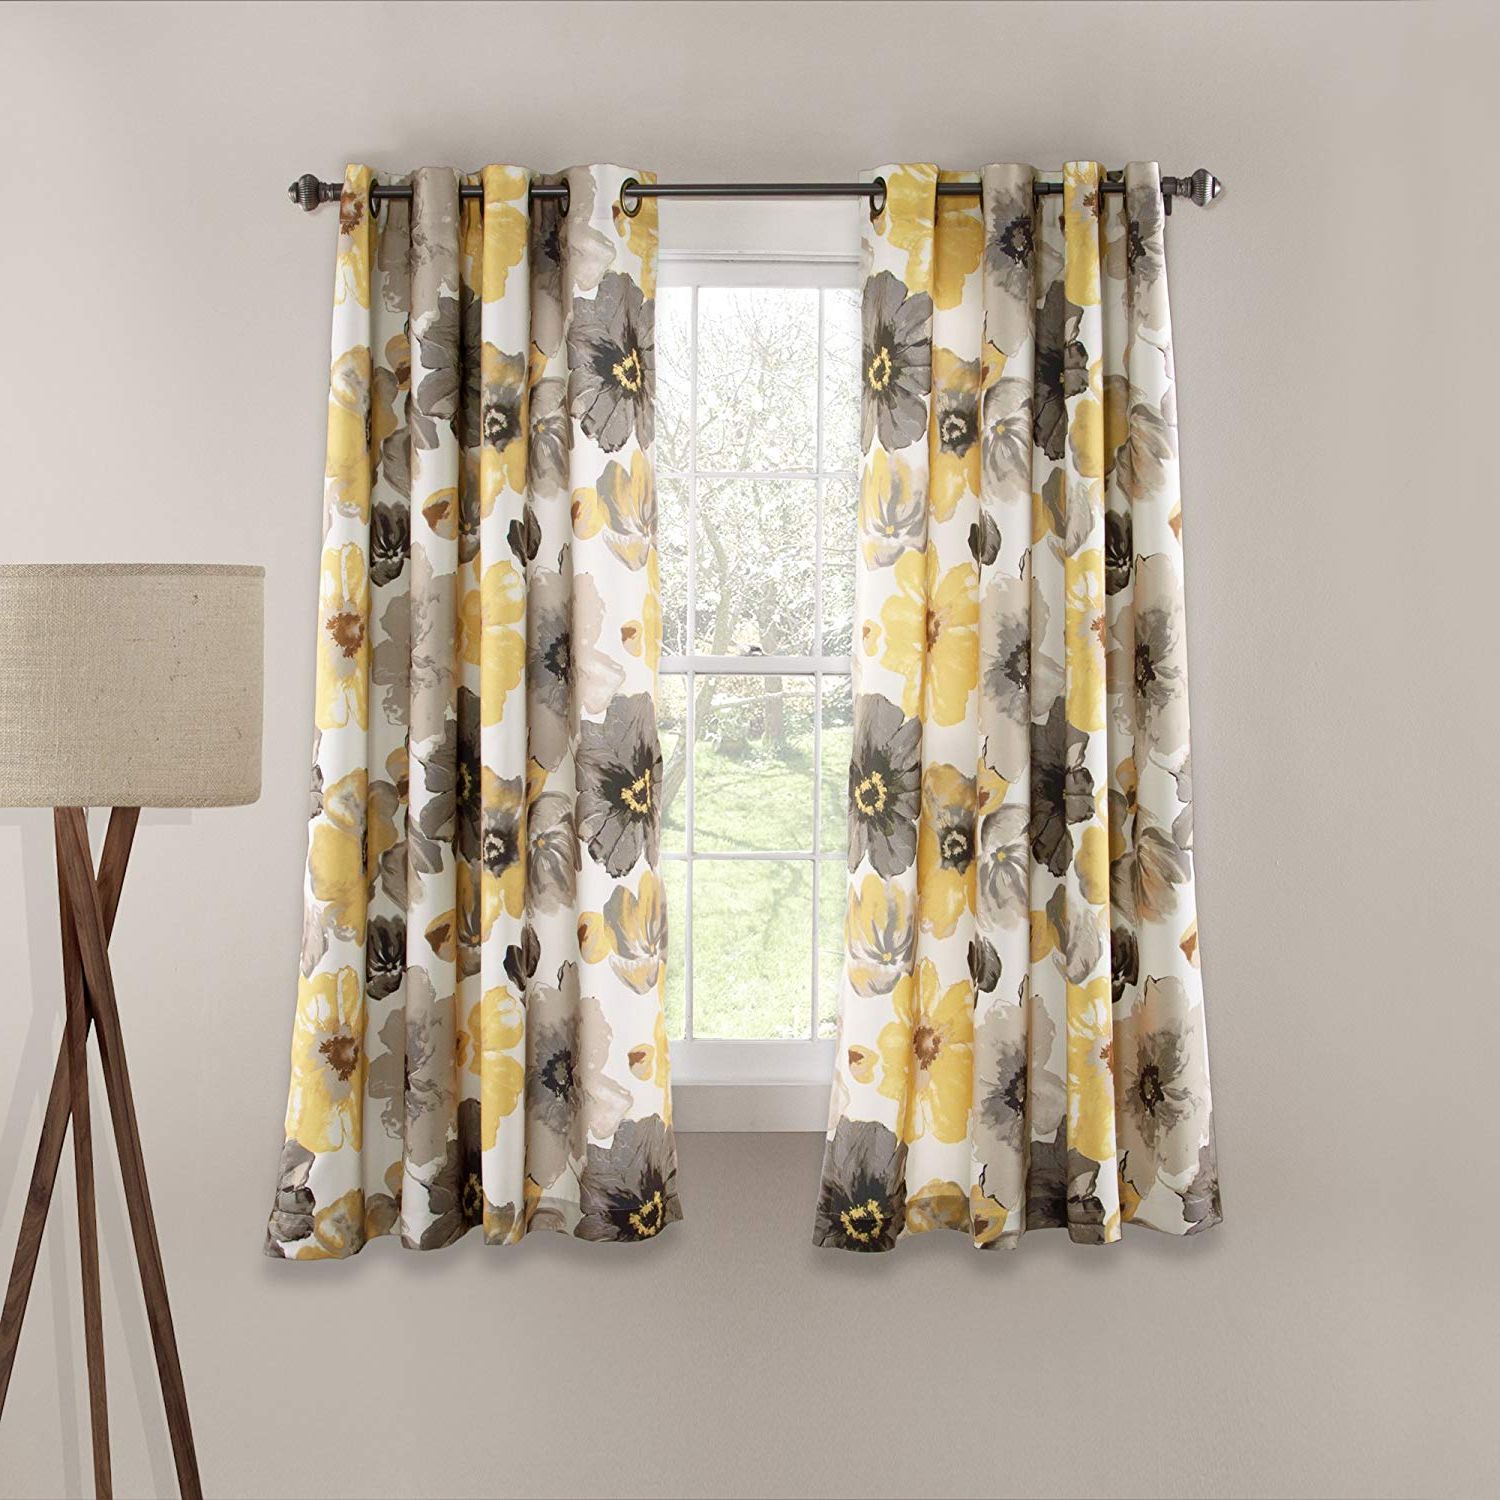 Lush Decor Leah Floral Room Darkening Yellow And Gray Window Curtains Panel  Set For Living Room, Dining Room, Bedroom (pair), 63” X 52” With Newest Leah Room Darkening Curtain Panel Pairs (View 9 of 20)